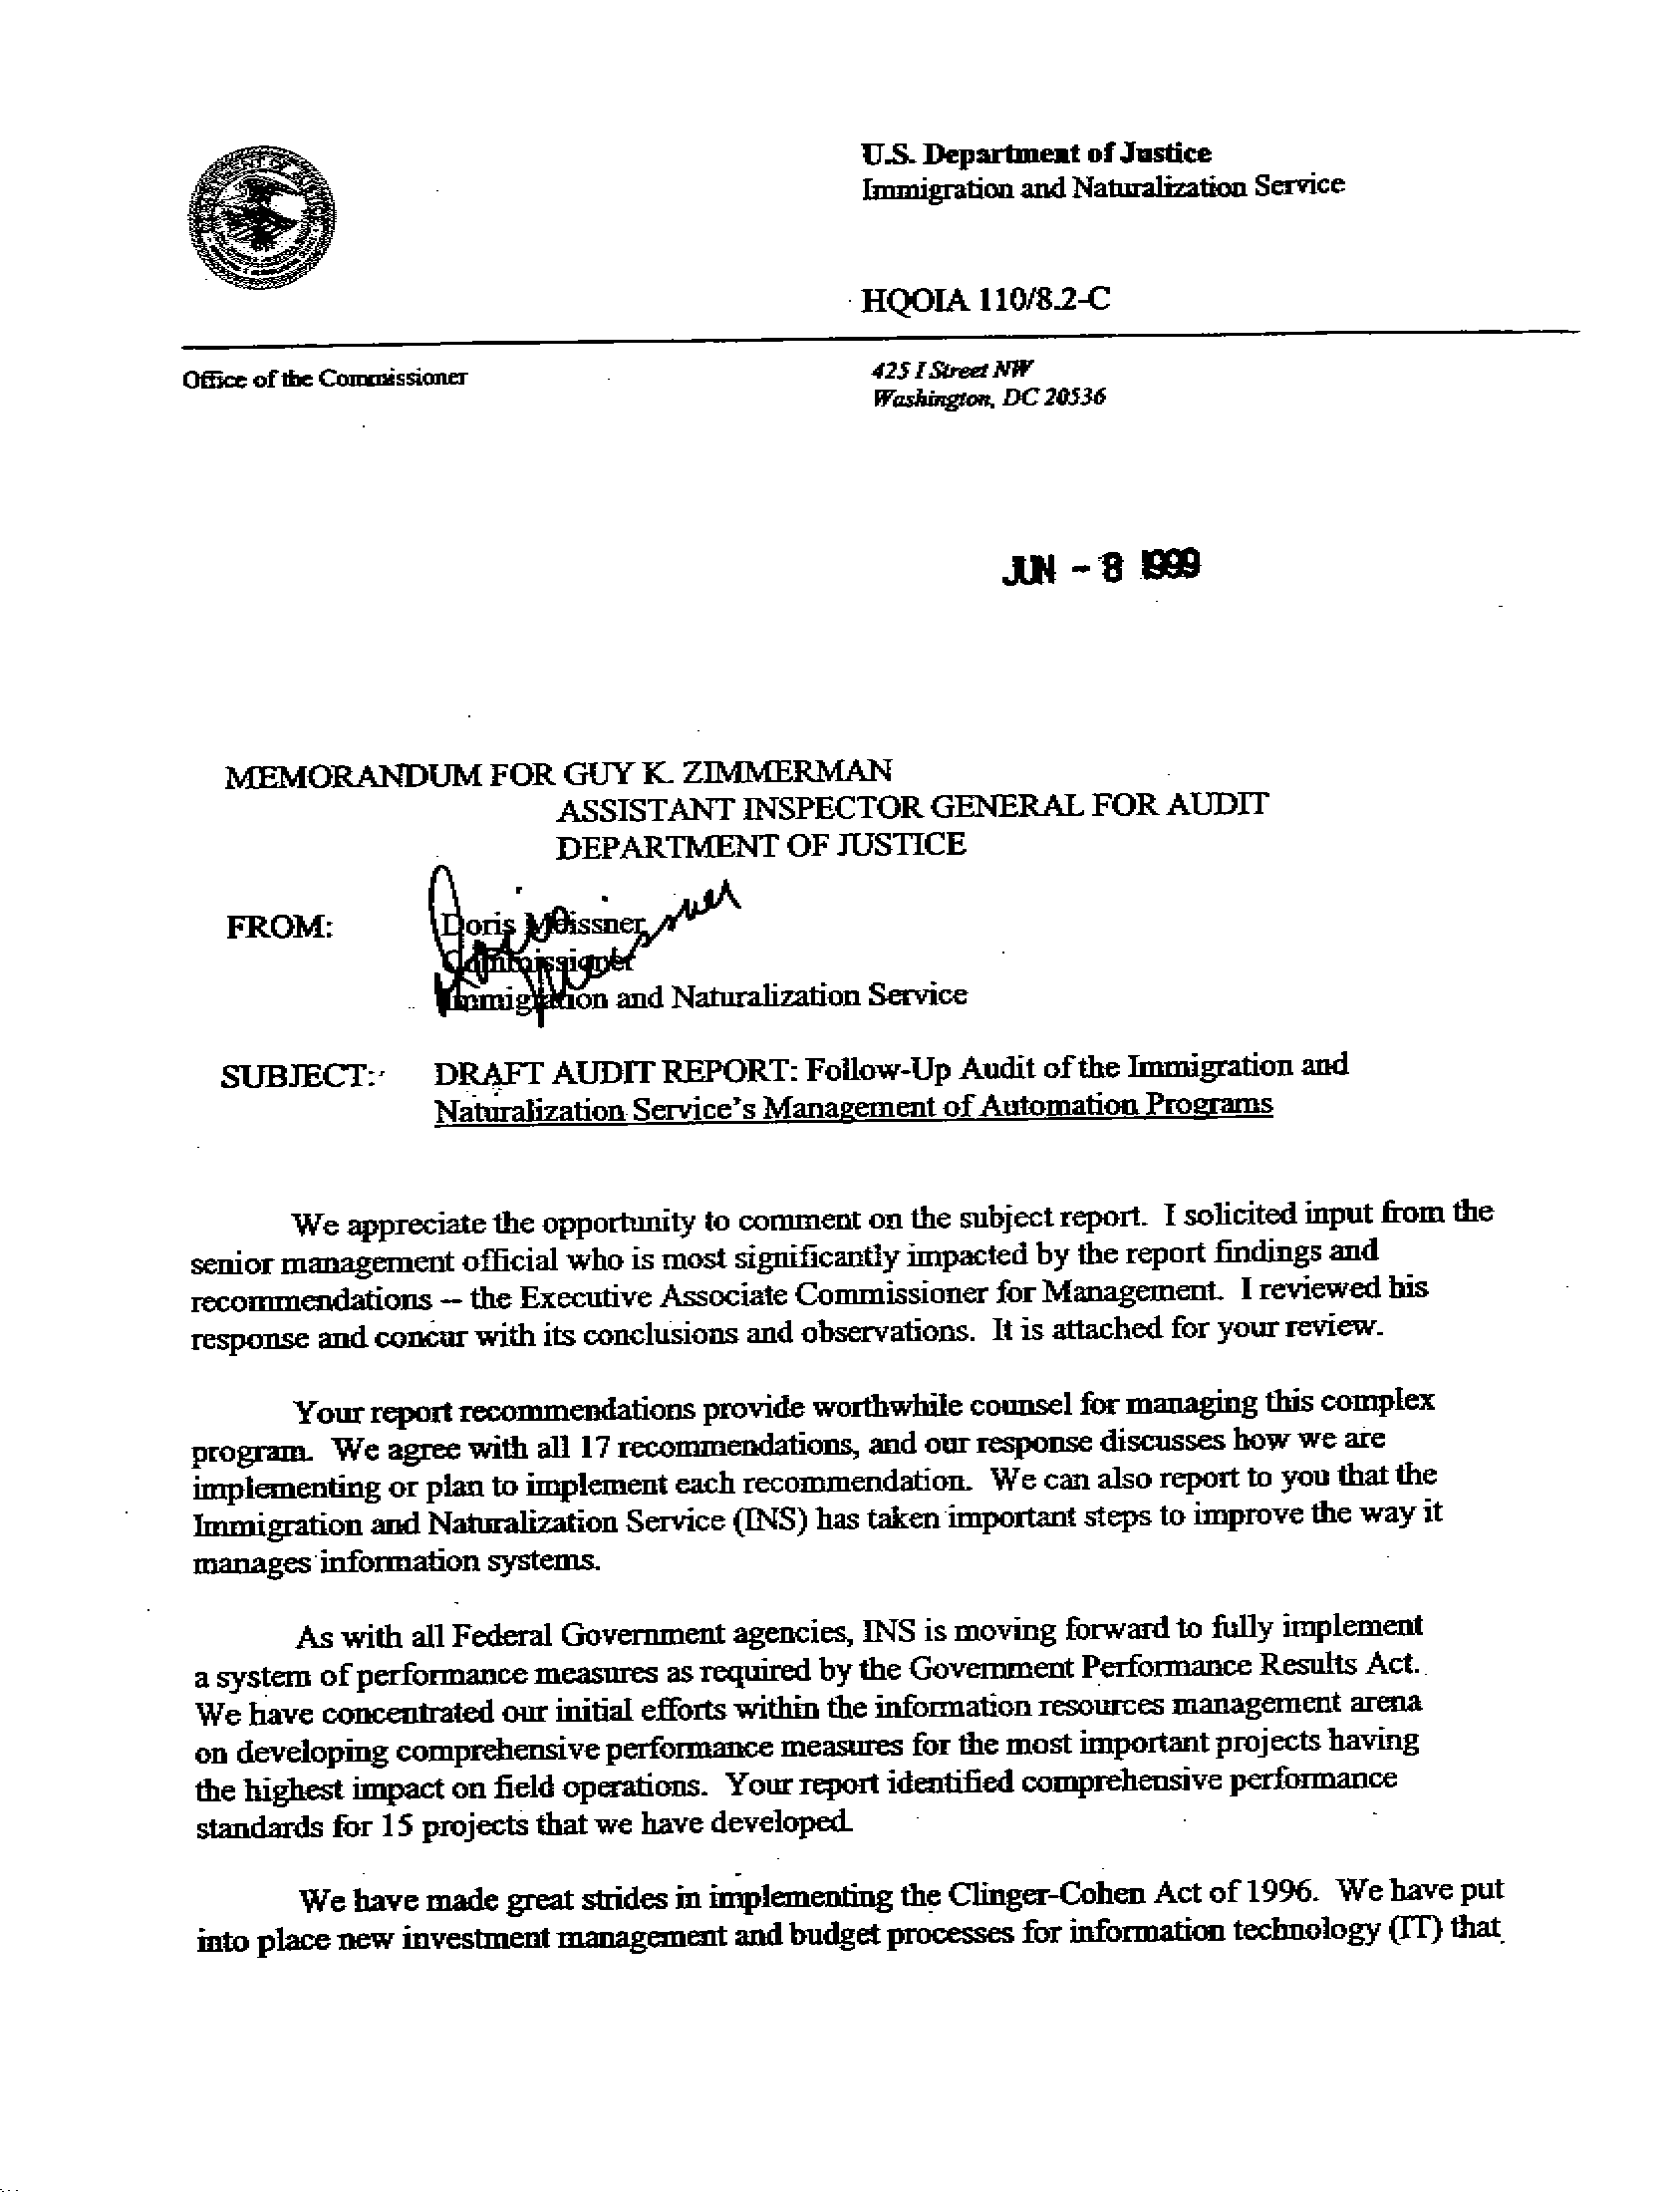 INS Reponse to the Draft Report